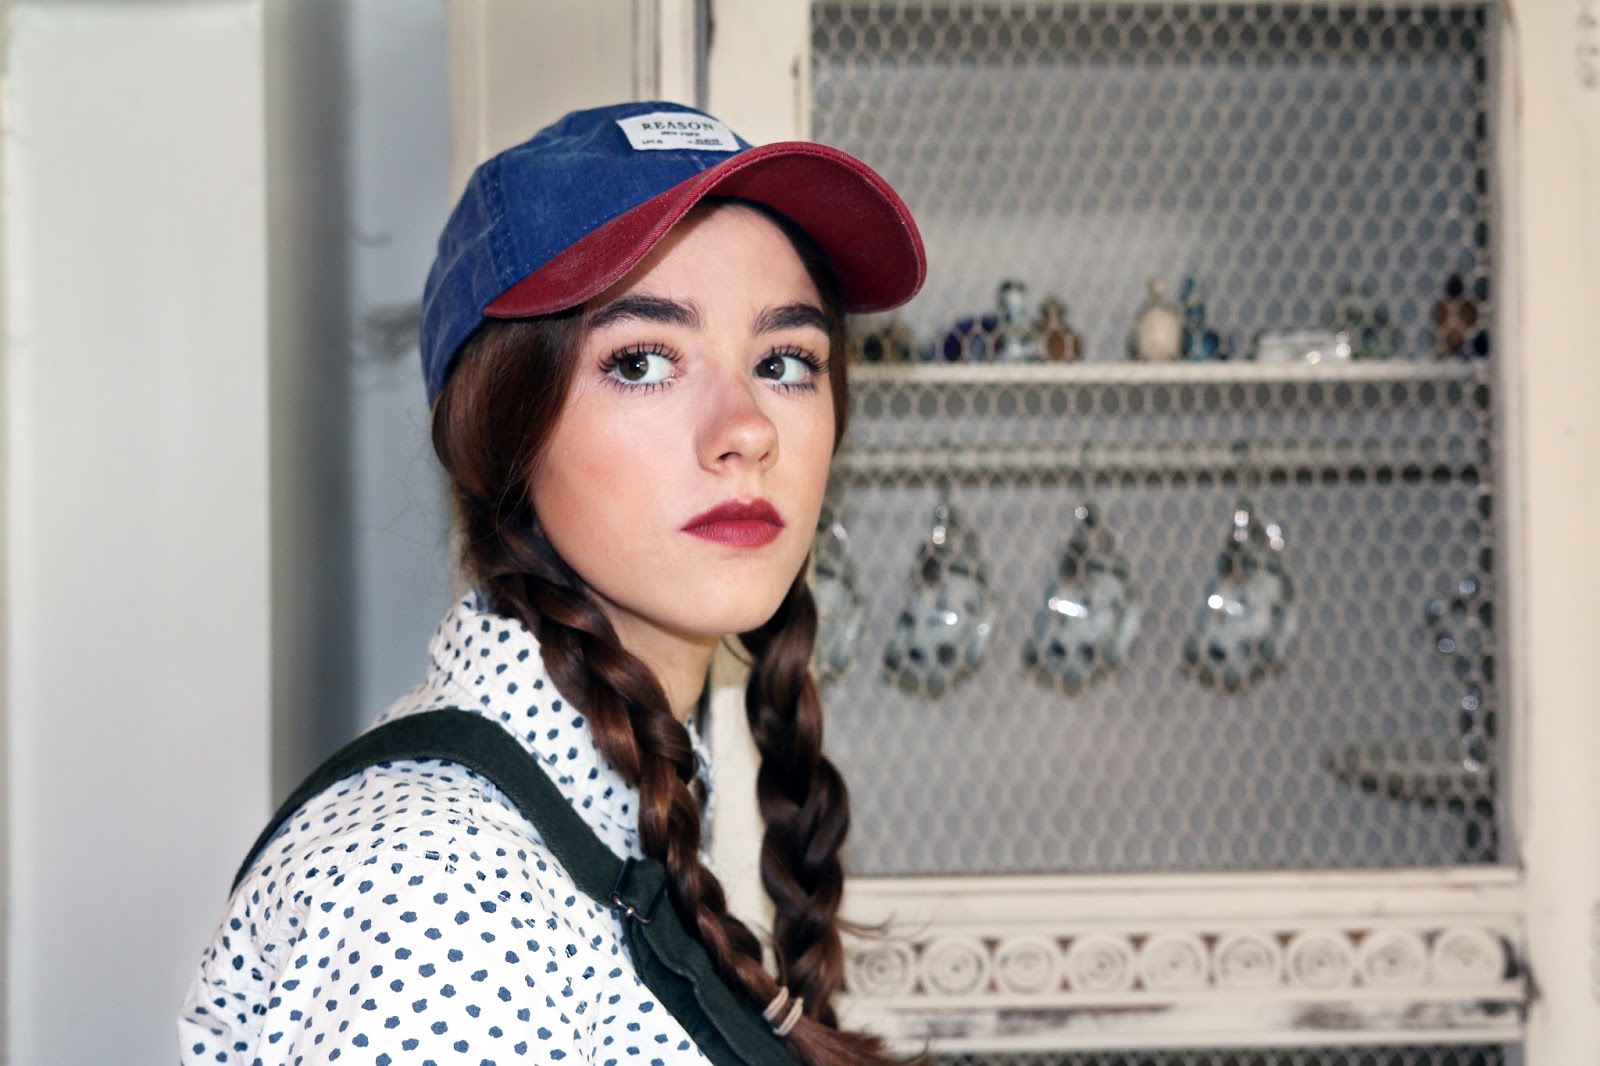 Alice in Wonderland,plaits,  Amelia, Mandeville, Jumpsuit, Mandeville Sisters, eyebrows, Blog, funny, fashion, comedy, jumpsuit, boiler suit, OOTD, Blogger, comment, witty, author, writing, Urban Outfitters, hat, cap, dungarees, dress, shirt, blouse.